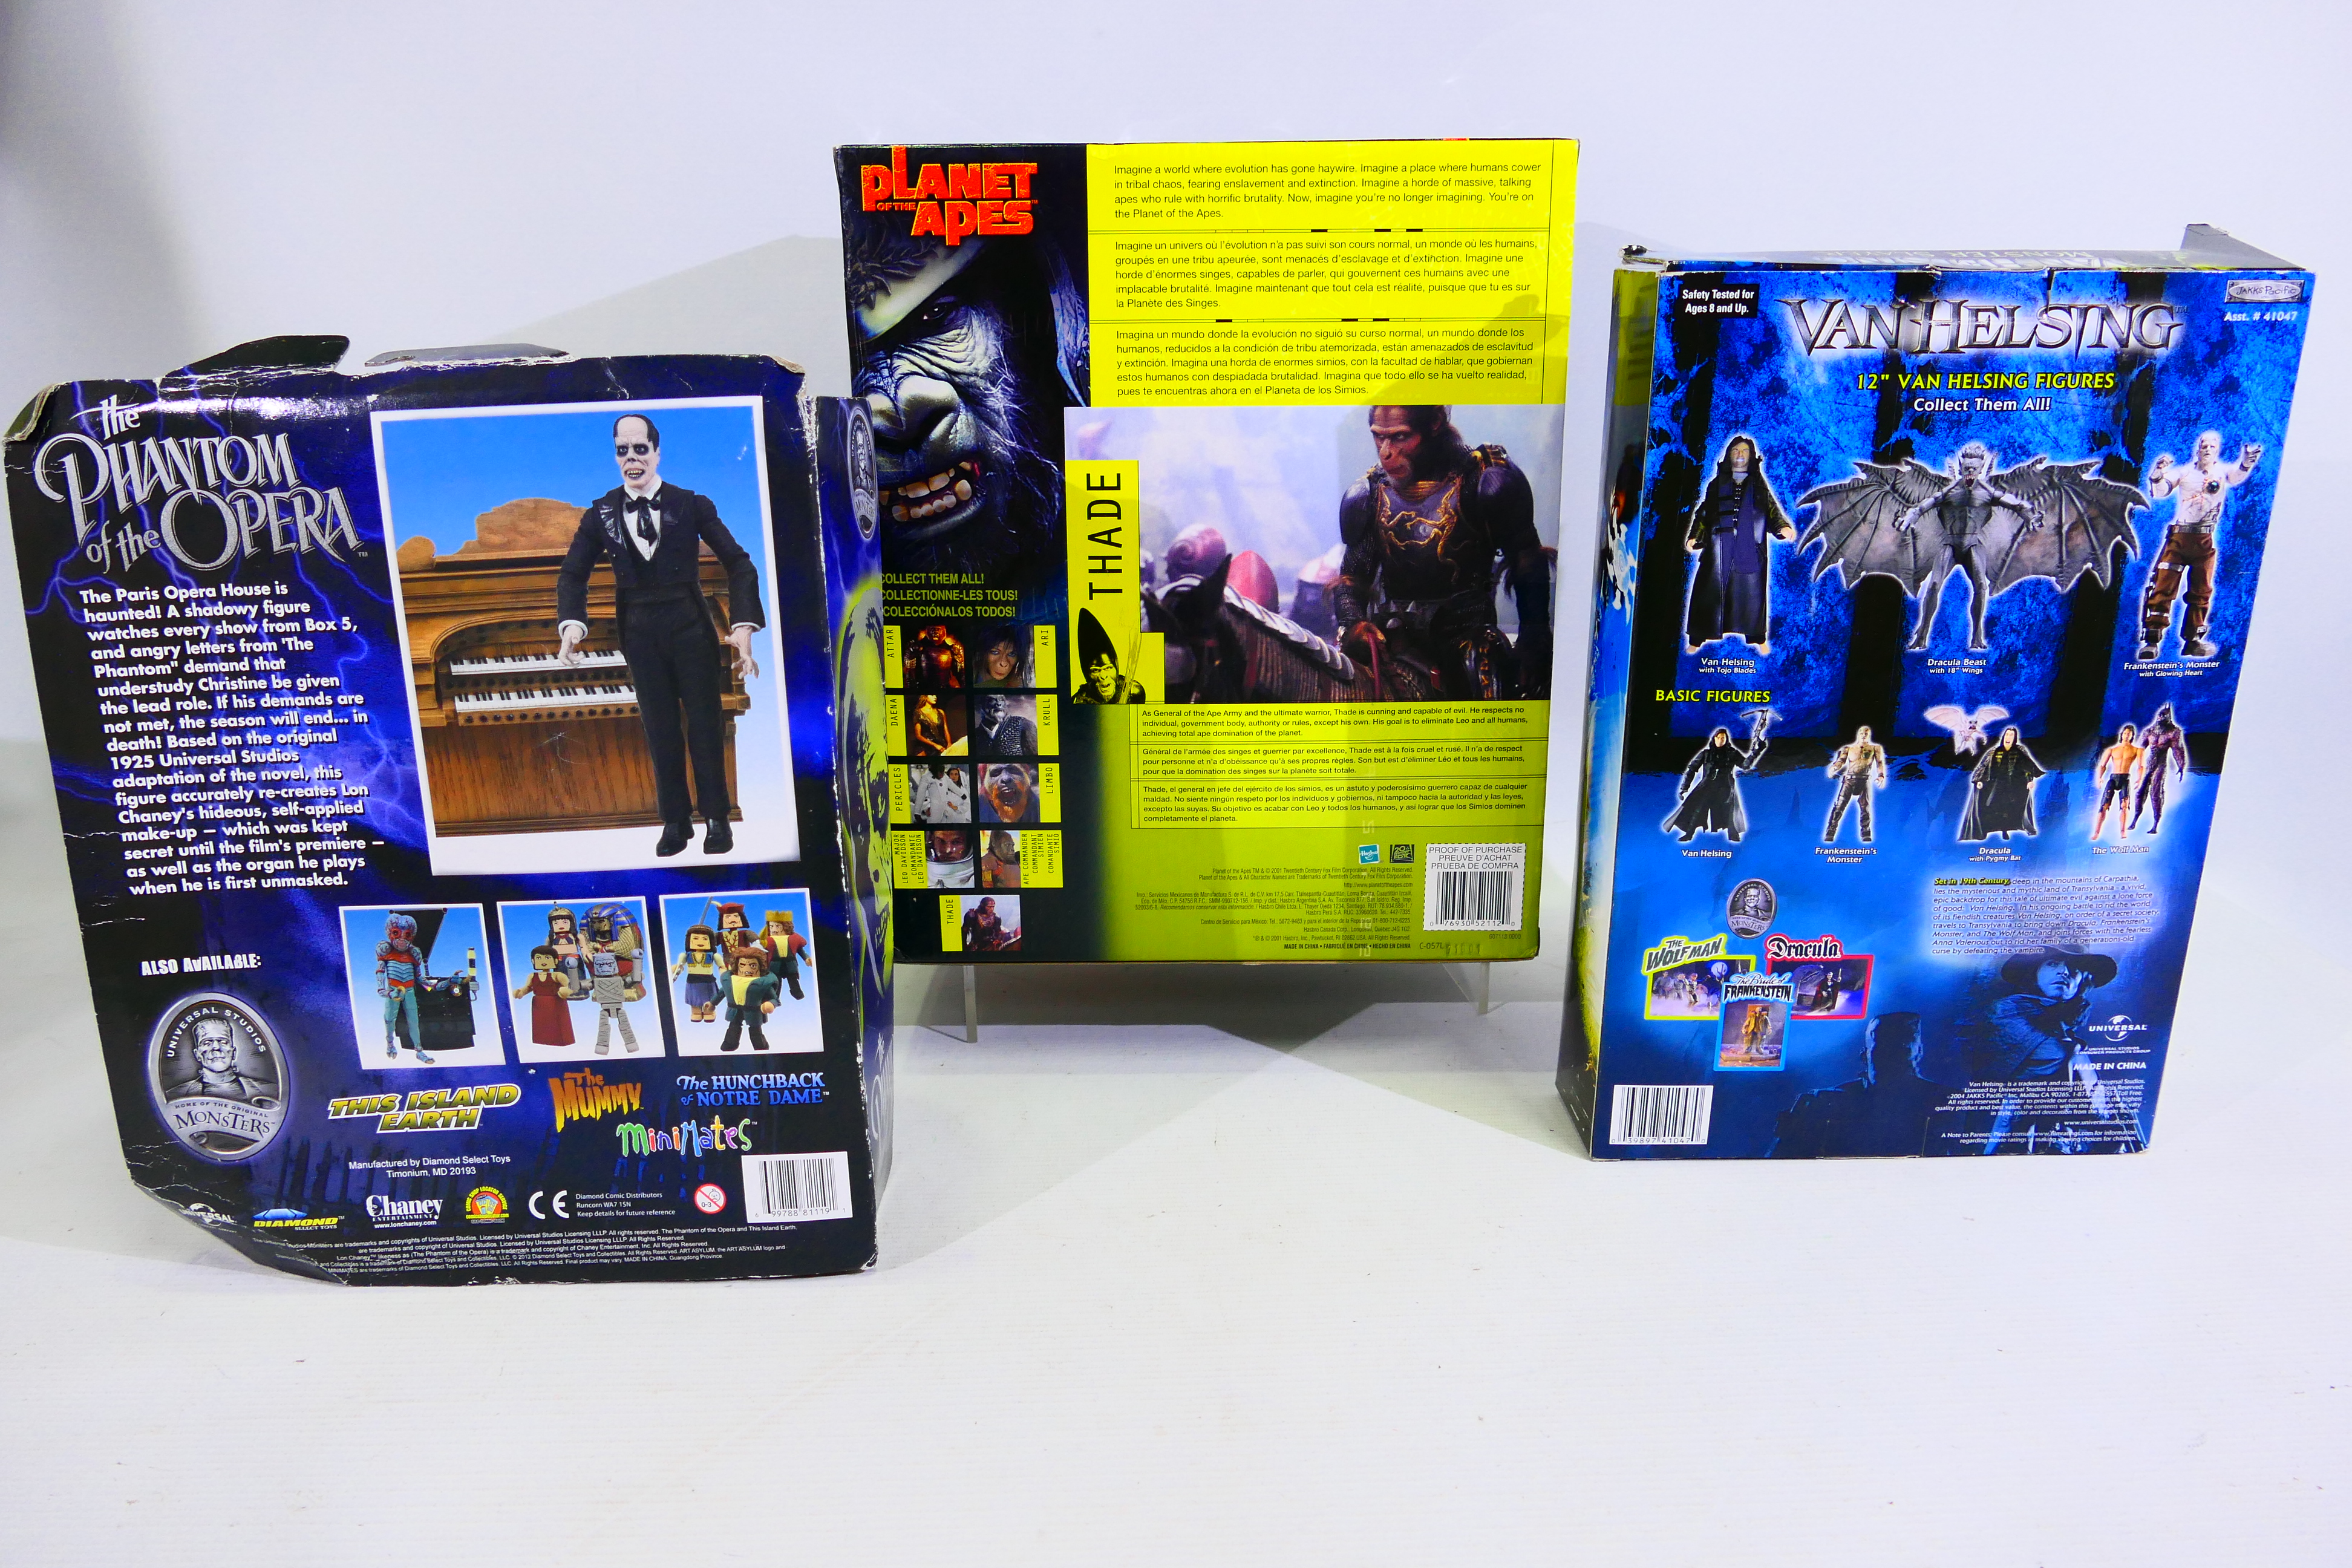 Hasbro, Jakks Pacific, Diamond Select Toys - 3 x boxed figures consisting of Planet of the Apes. - Image 5 of 6